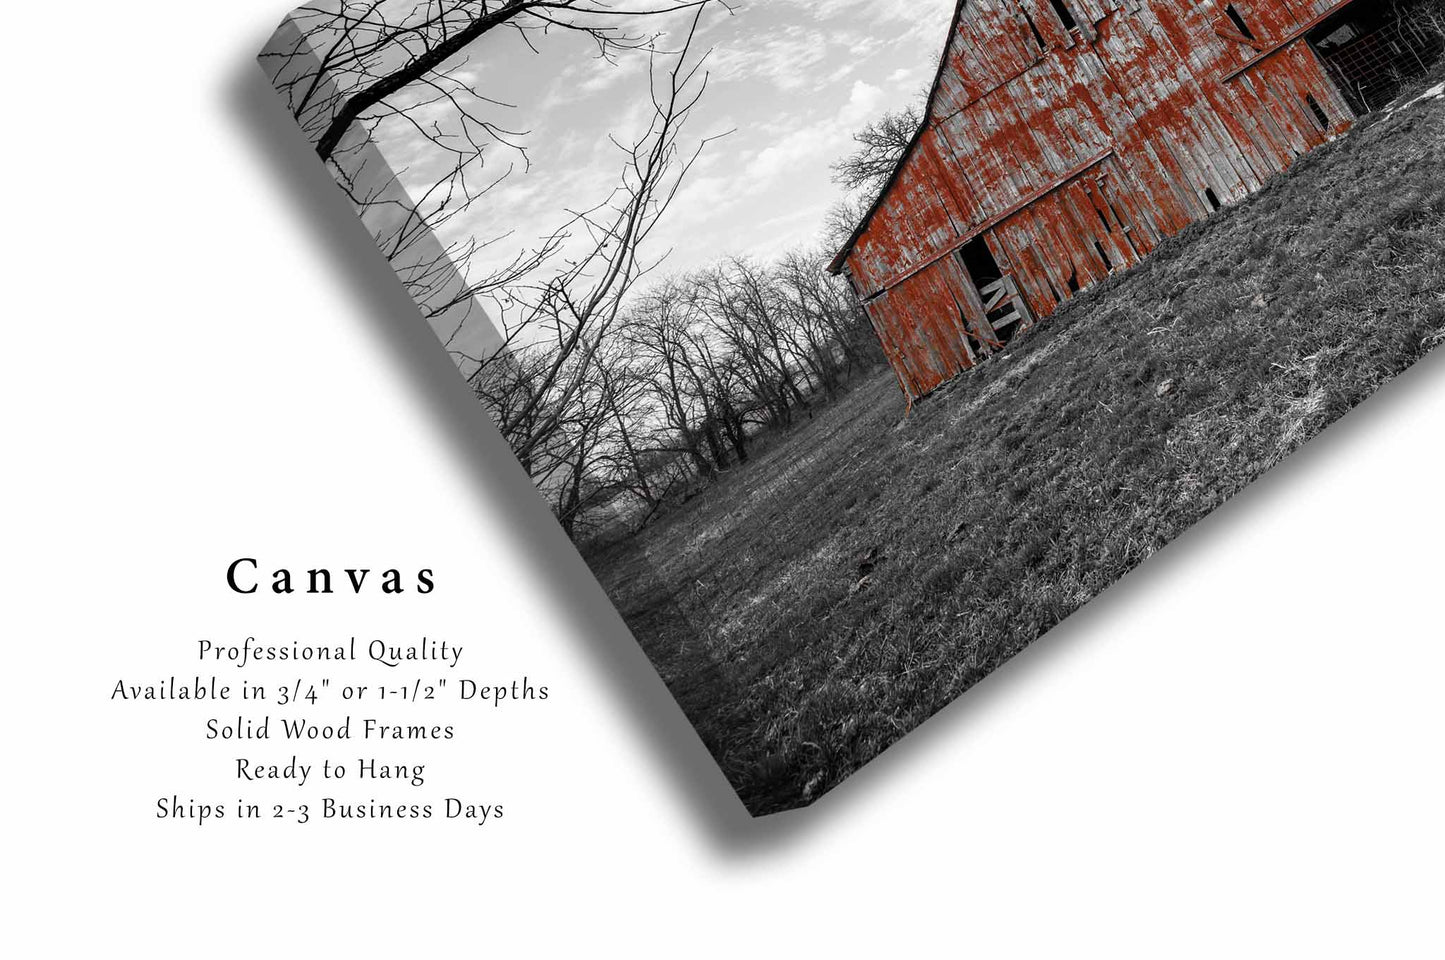 Country Canvas Wall Art | Rustic Barn Photo | Color on Black and White Gallery Wrap | Missouri Photography | Rural Picture | Farmhouse Decor